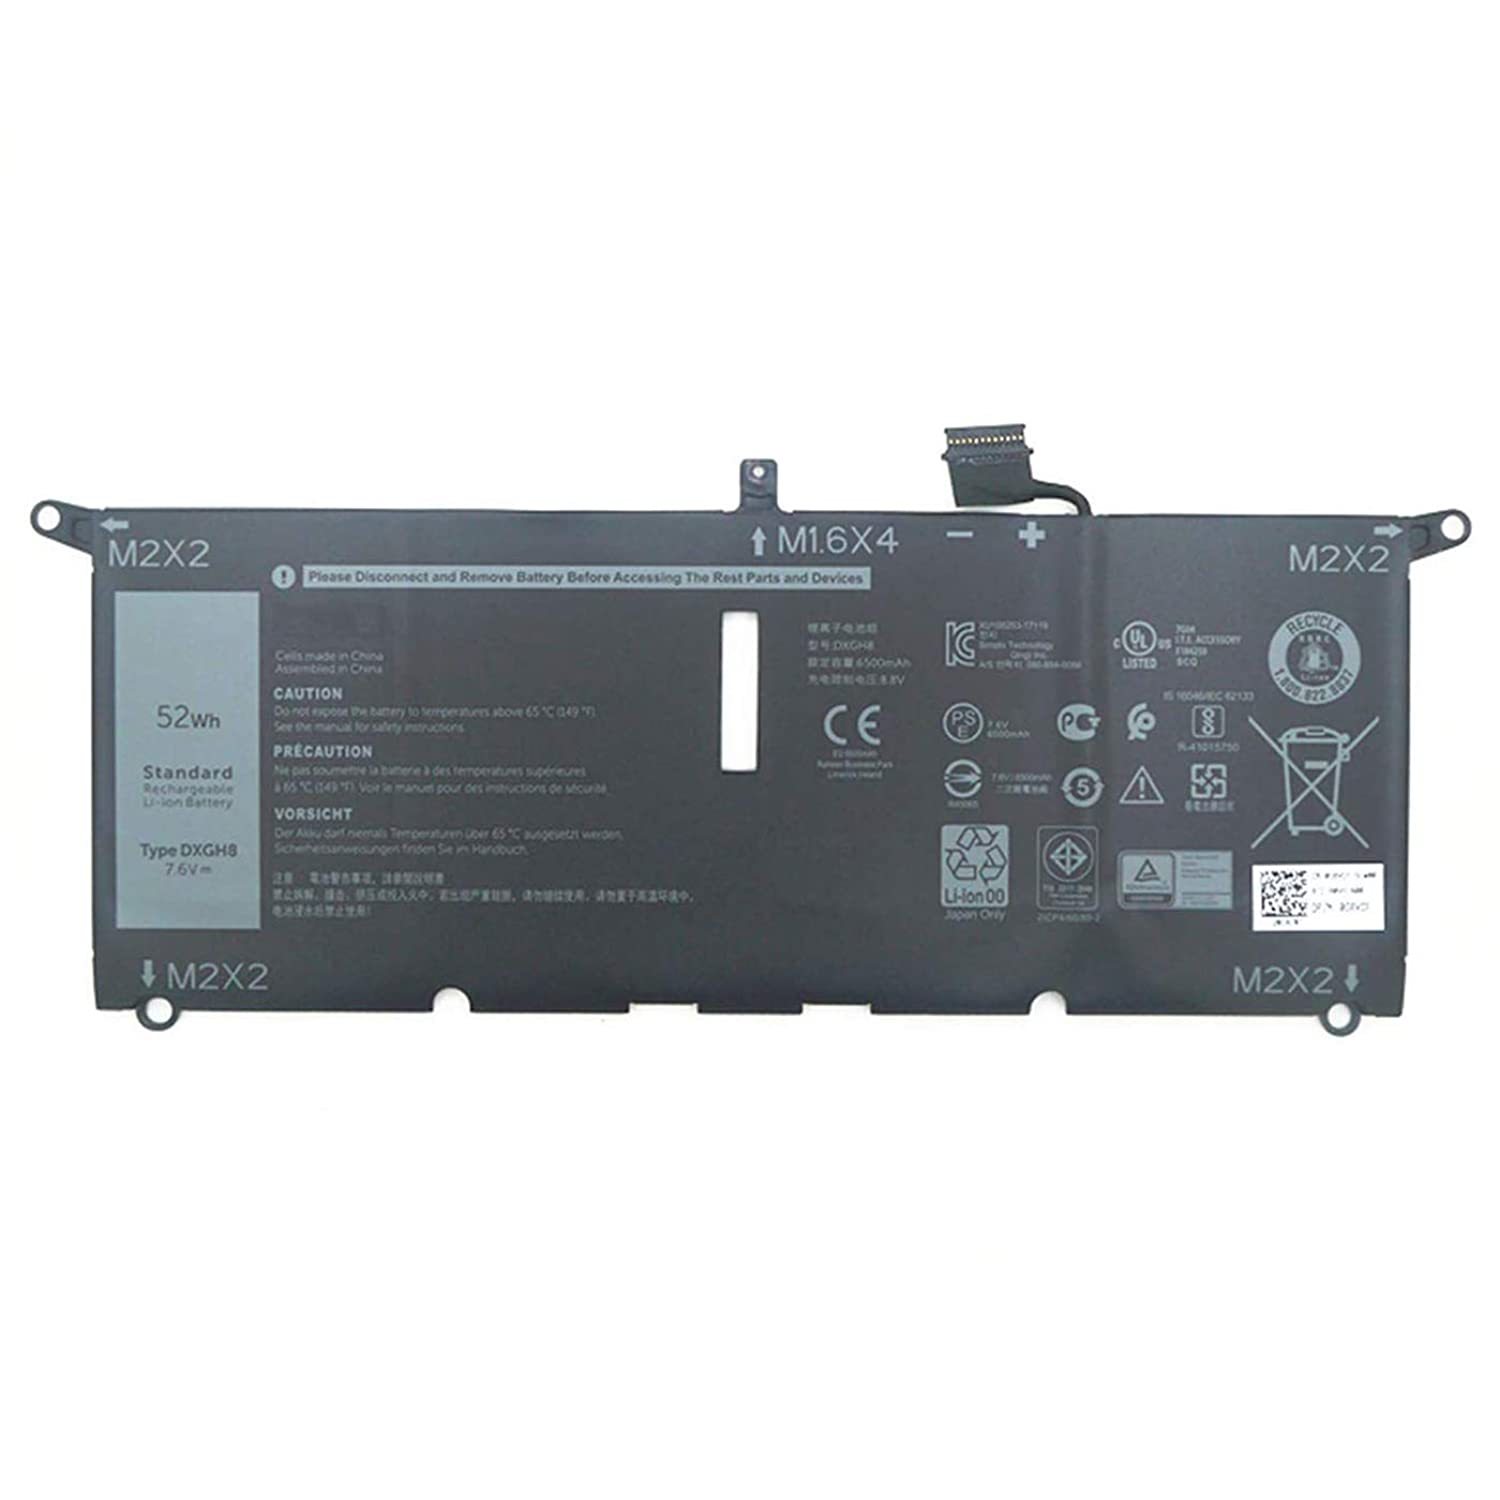 replacement laptop battery for dell dxgh8 (7.6v 52wh 6500mah) xps 13 2018 xps 13 - $63.99